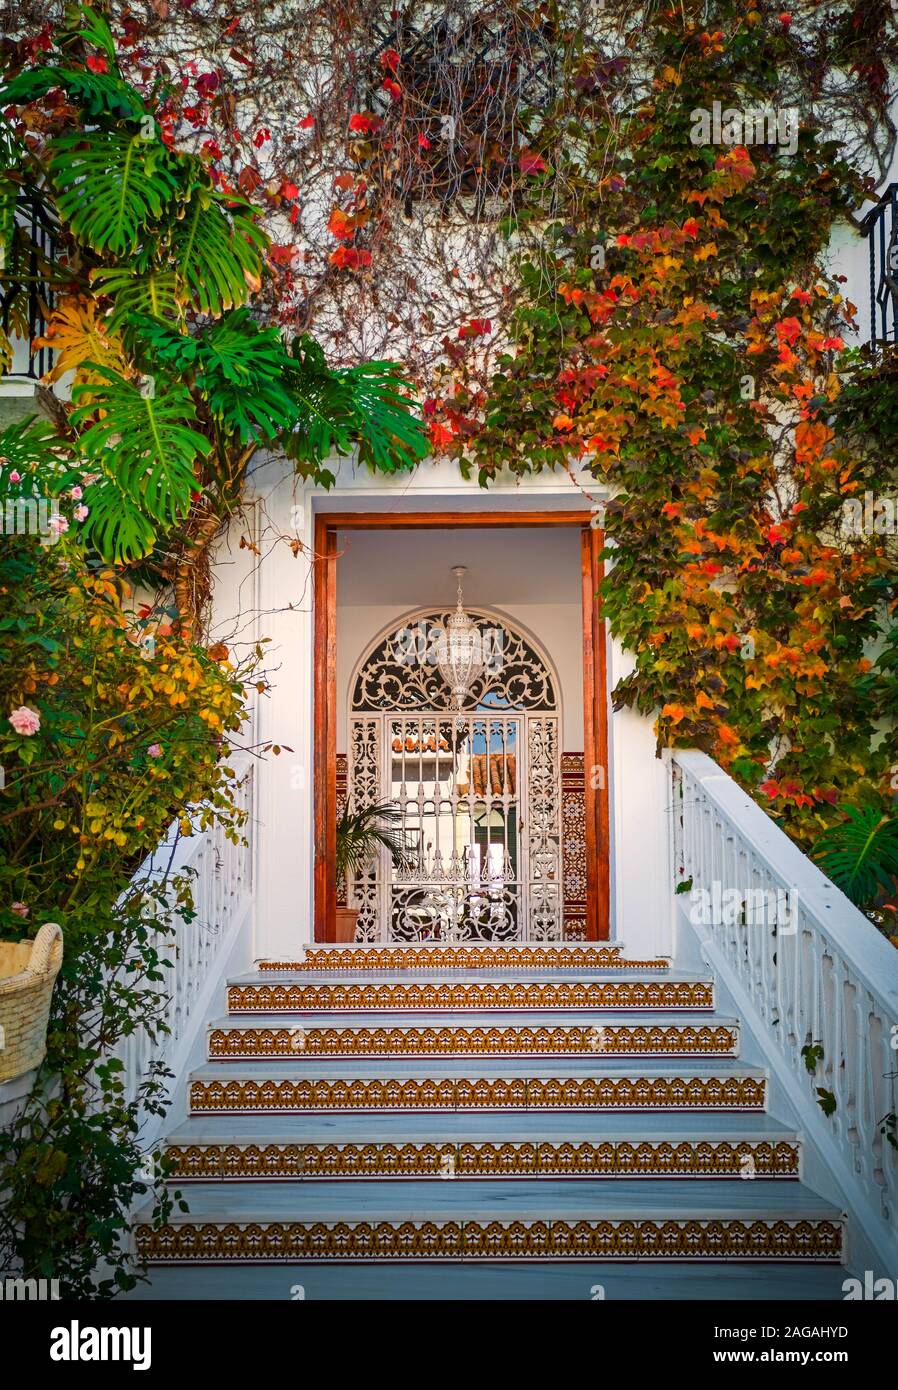 An elegant entrance to a house in Nerja, with Arabic tiles on the step risers all framed by mixed climbing plants. Malaga Province, Andalusia, Spain Stock Photo